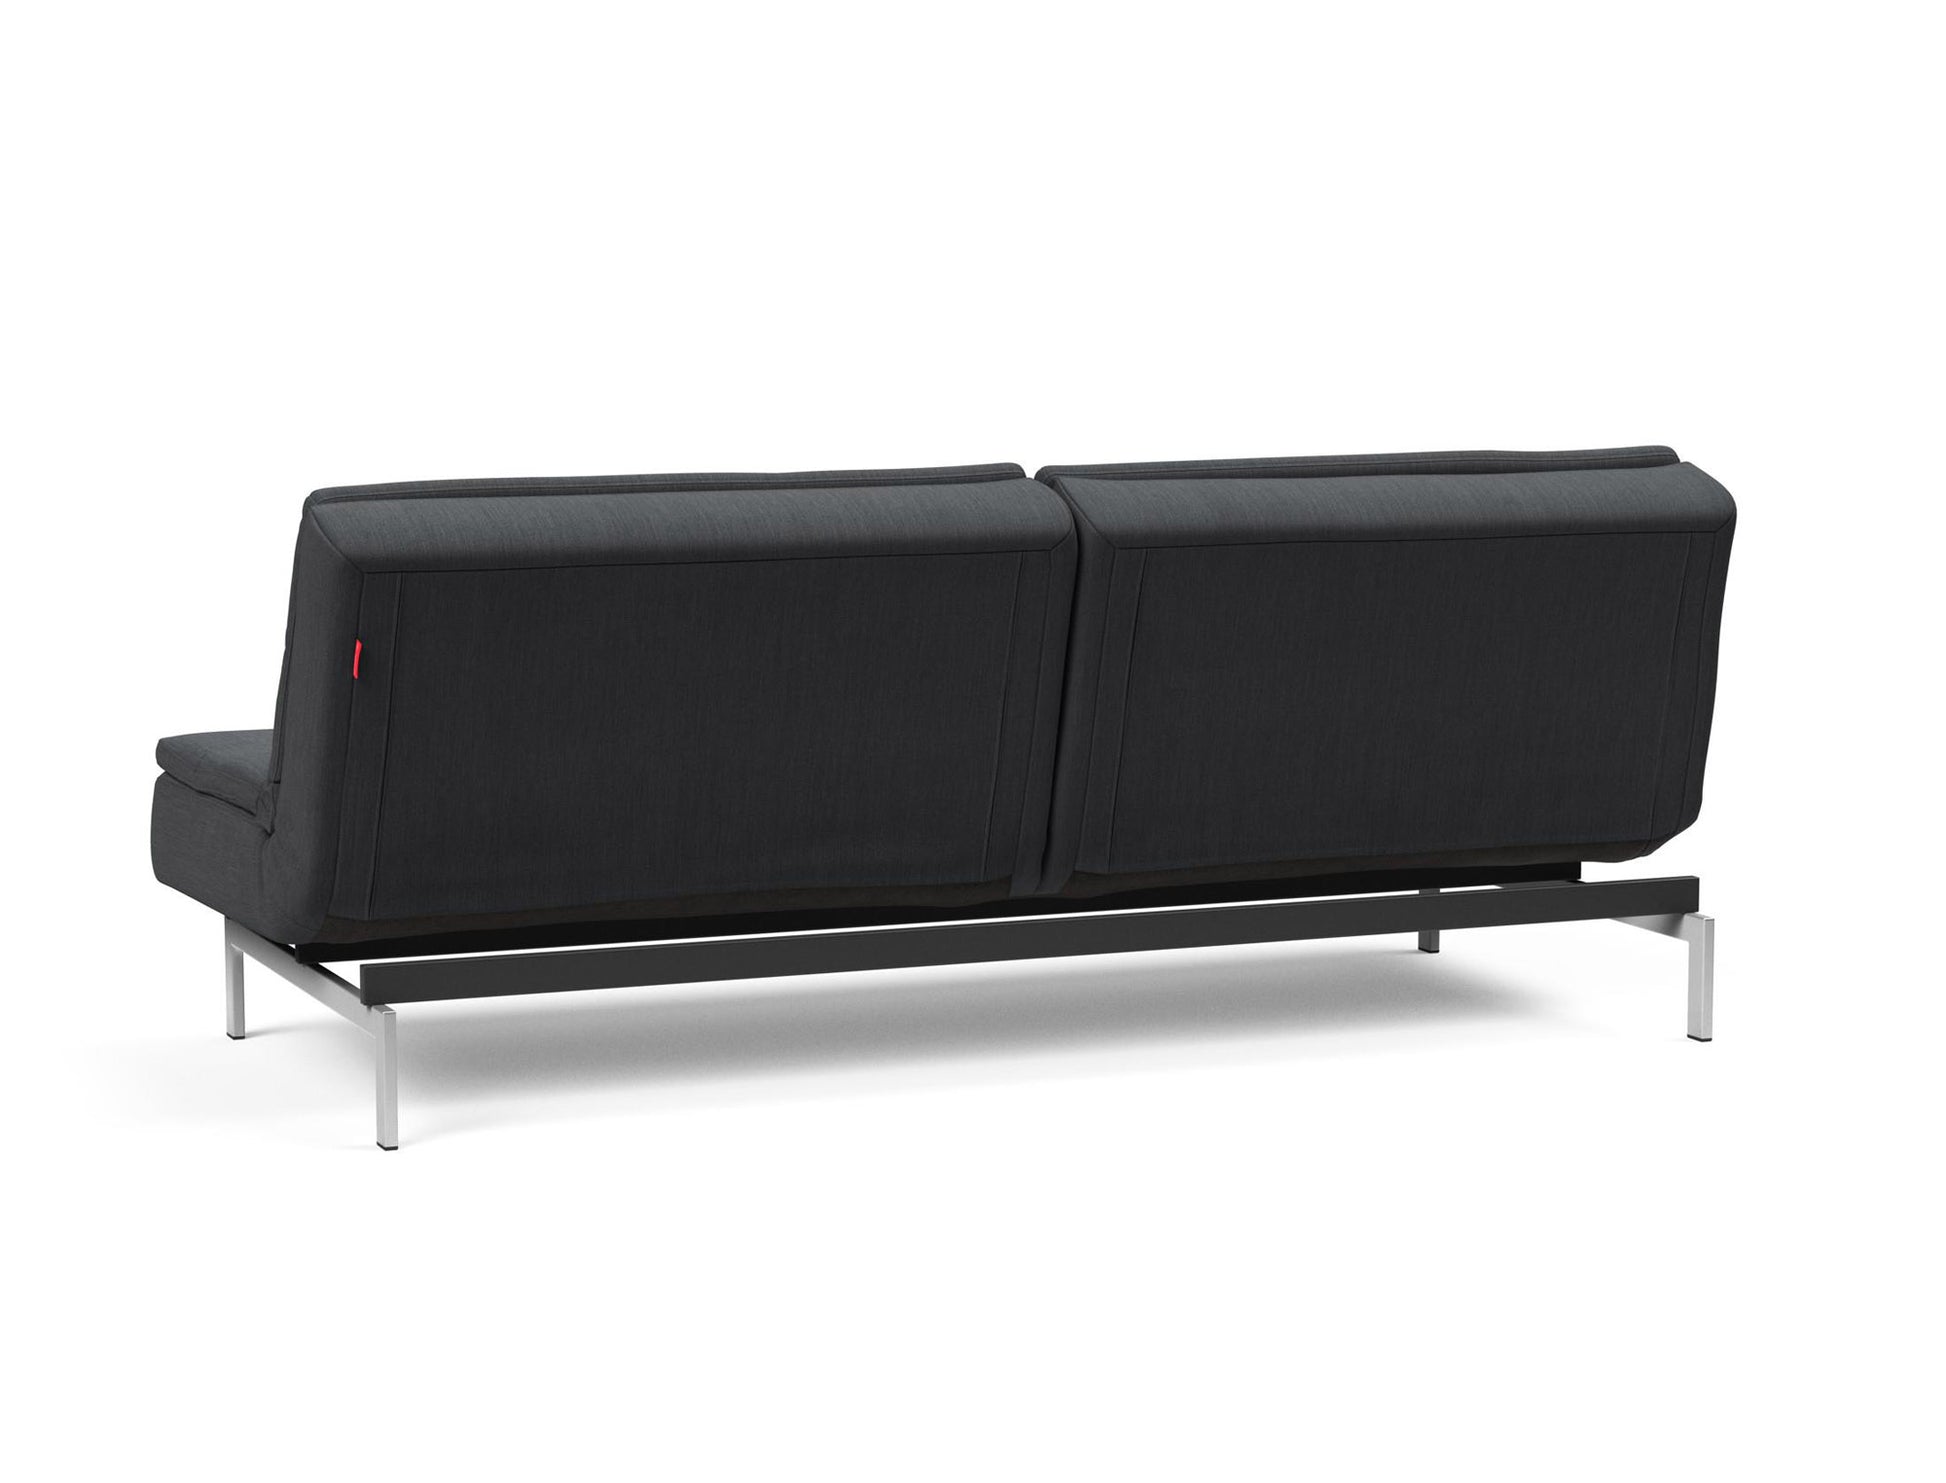 Innovation Living Dublexo Deluxe Sofa Bed With Stainless Steel Legs